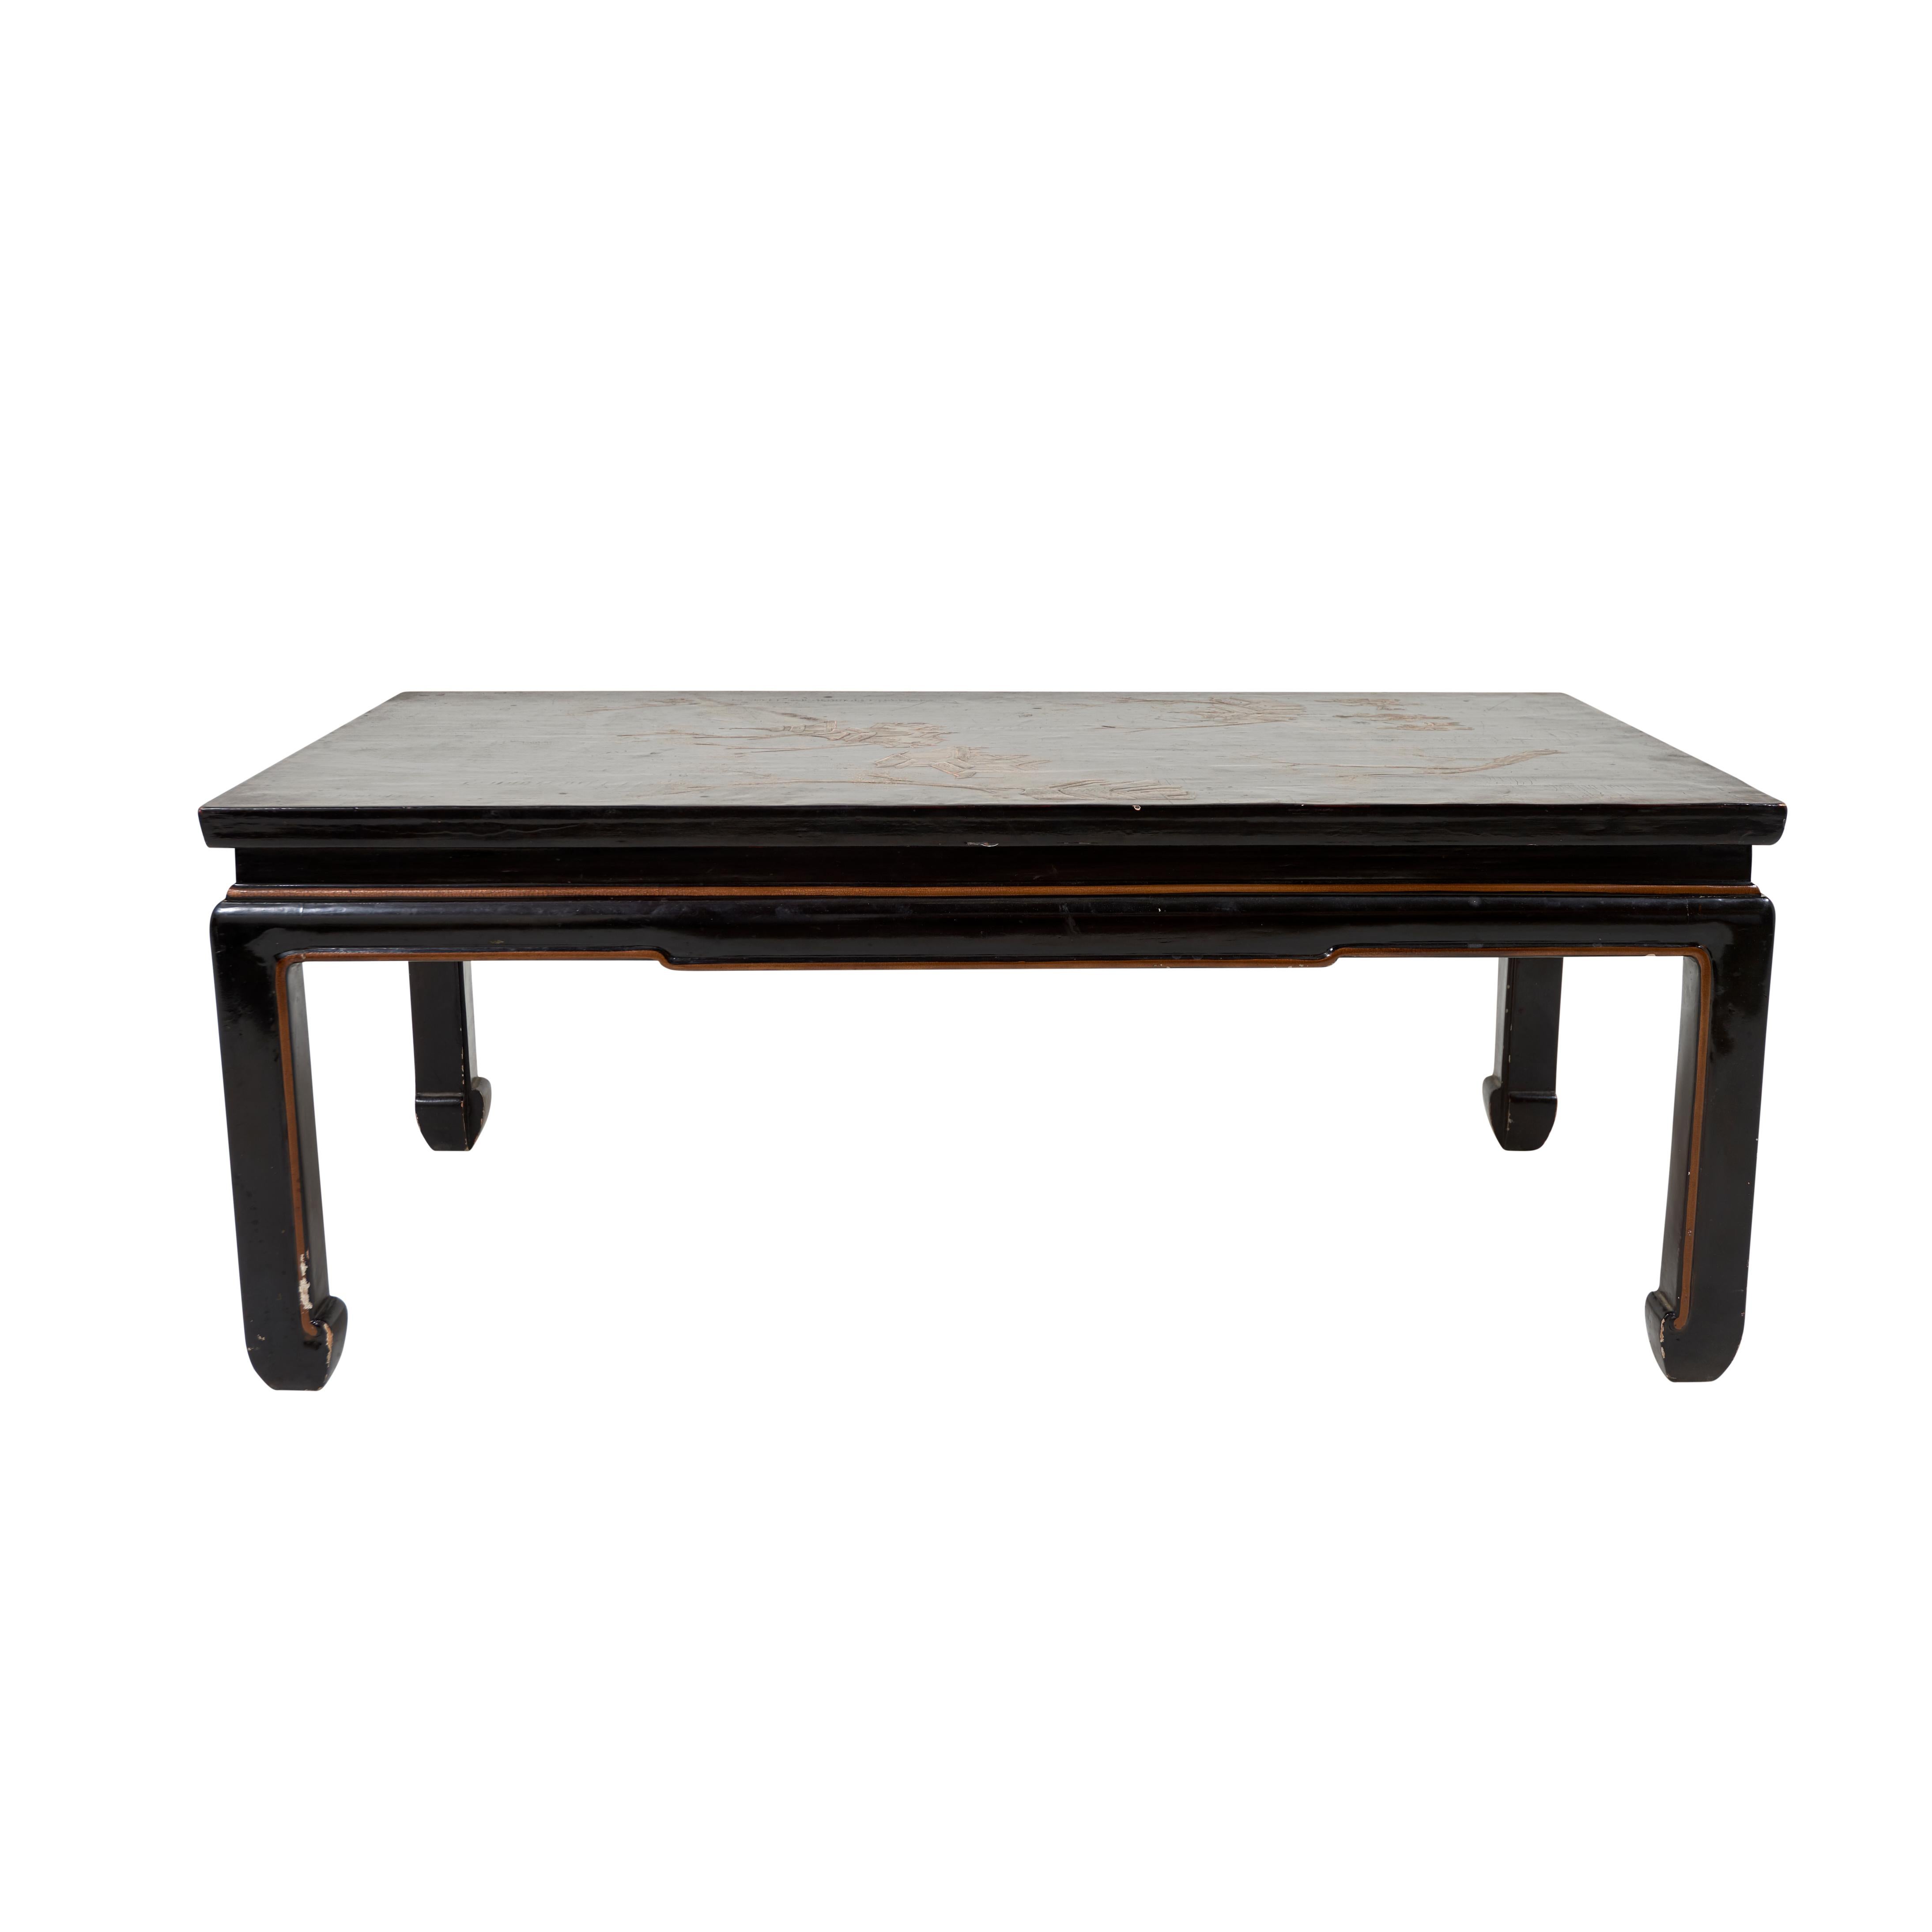 This 20th century Chinese lacquer coffee table is from France.

Since Schumacher was founded in 1889, our family-owned company has been synonymous with style, taste, and innovation. A passion for luxury and an unwavering commitment to beauty are